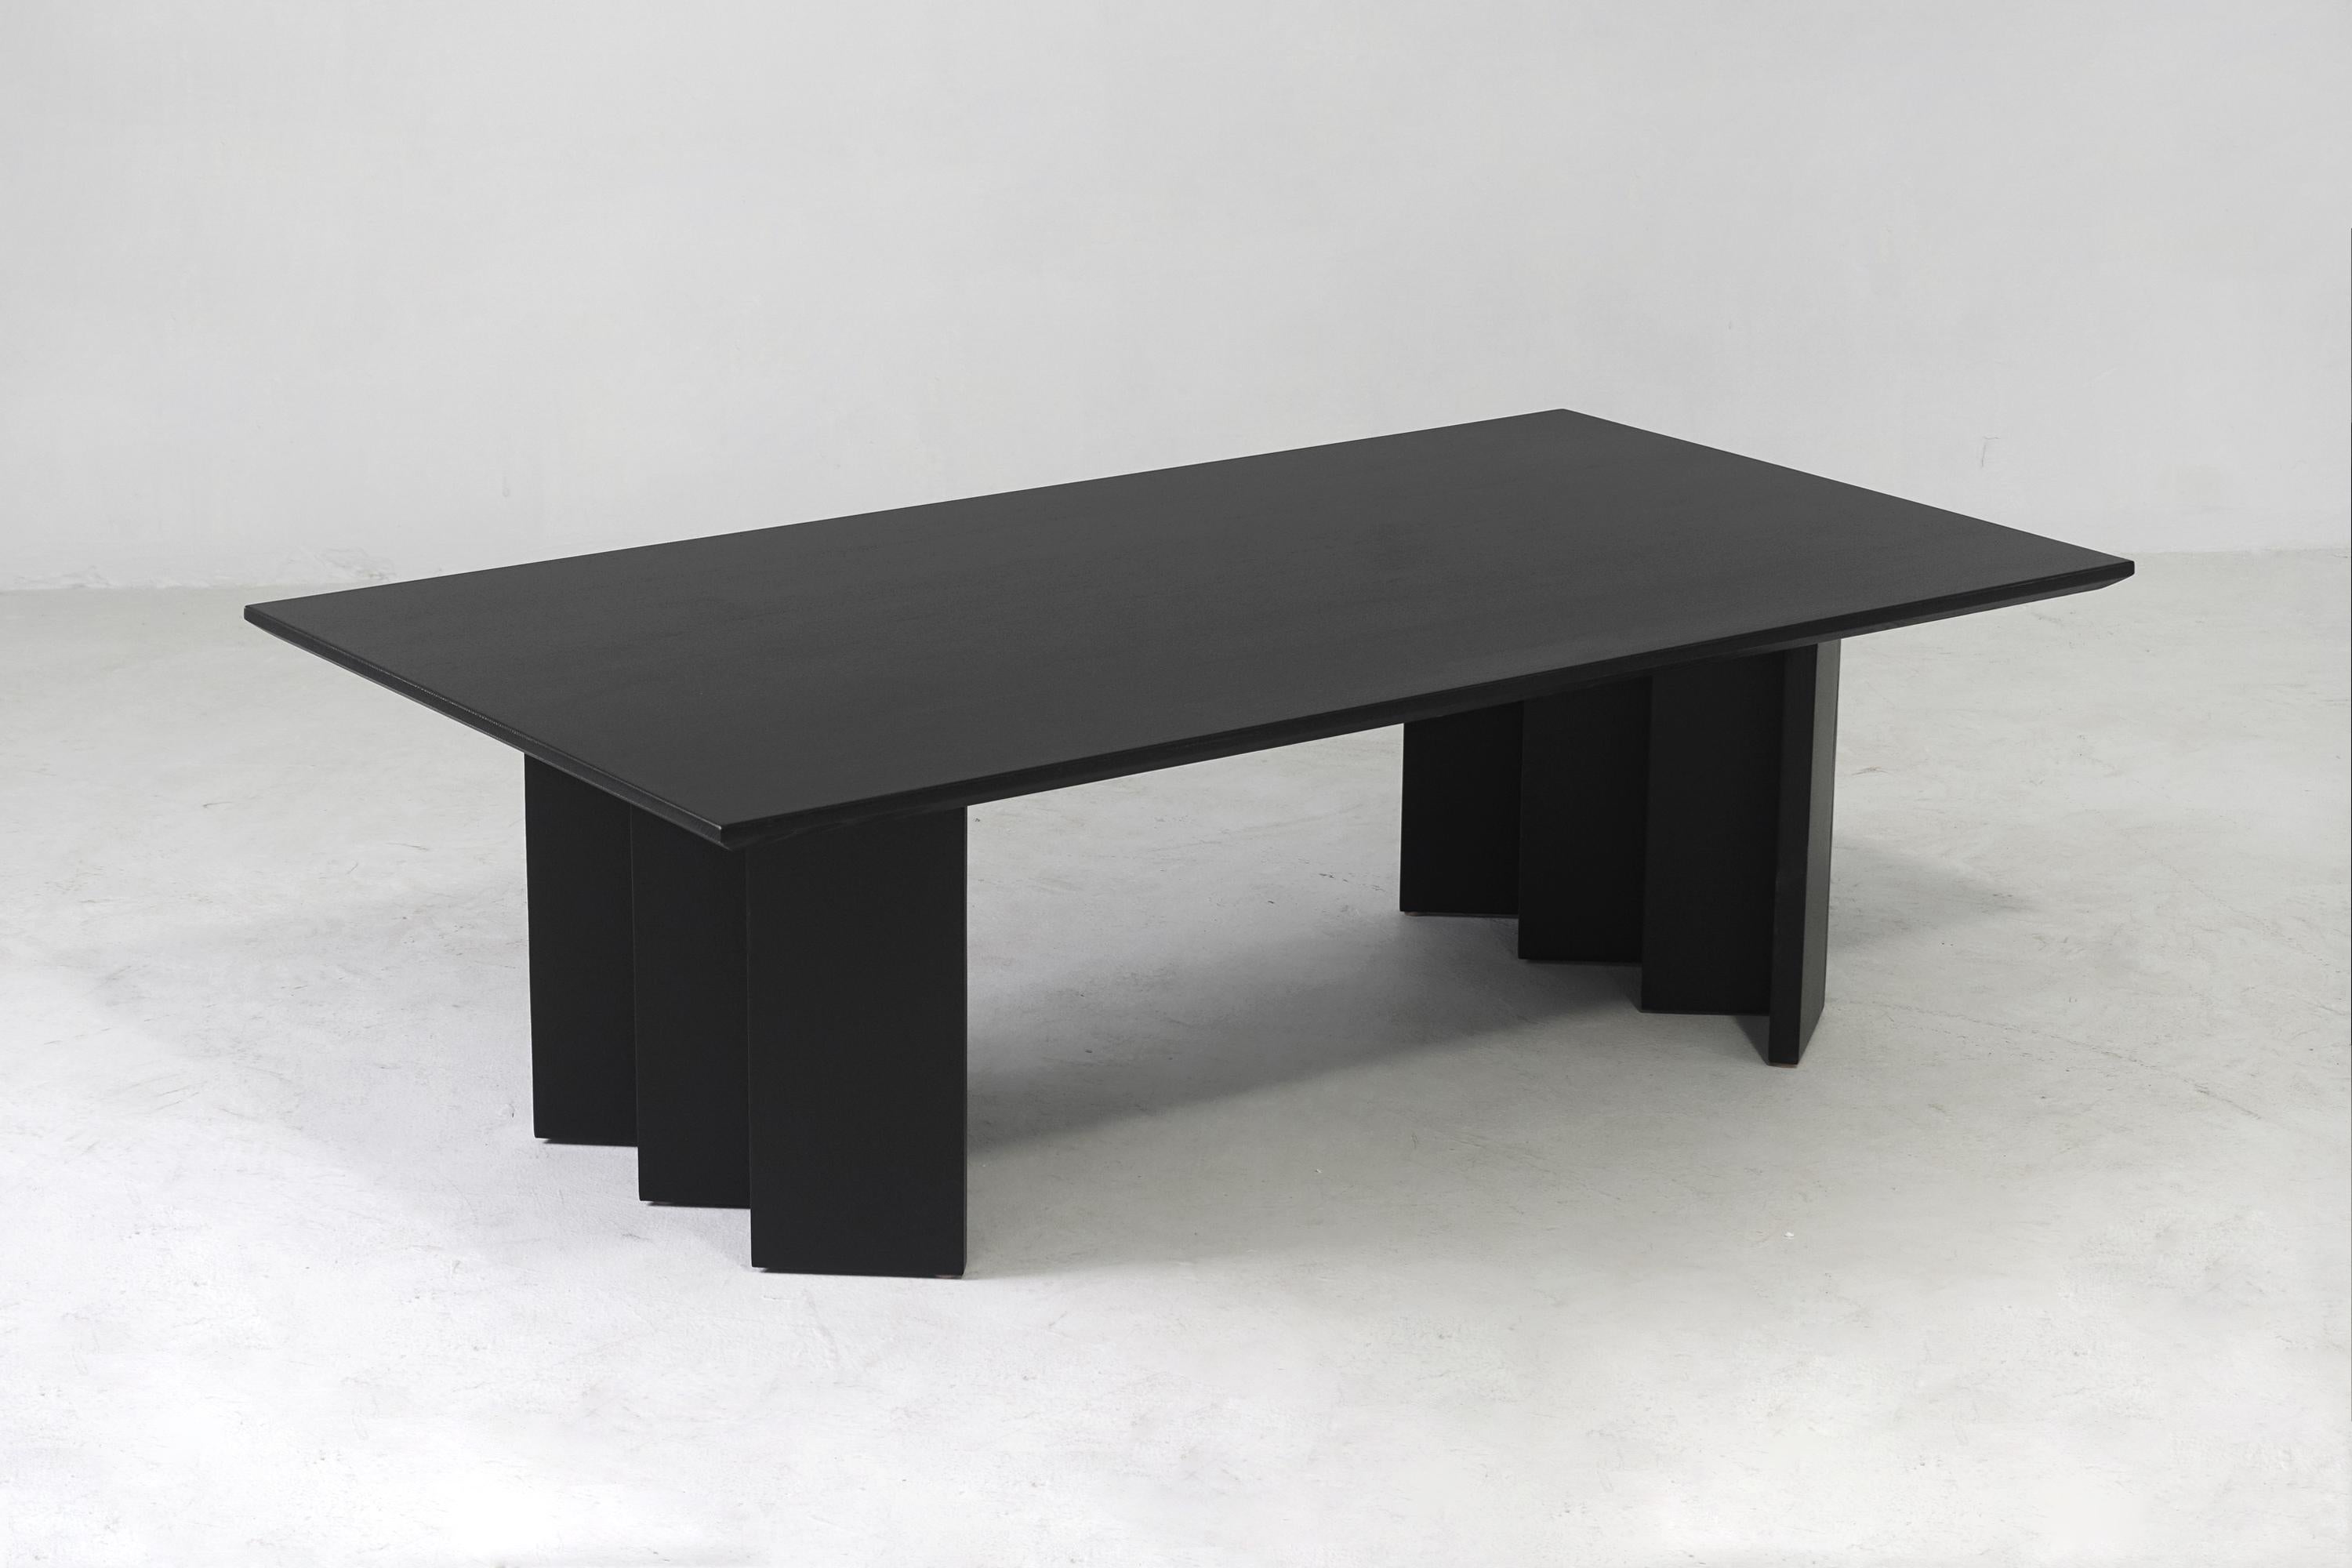 Chinese Zafal Coffee Table in Black, Minimalist Coffee Table For Sale